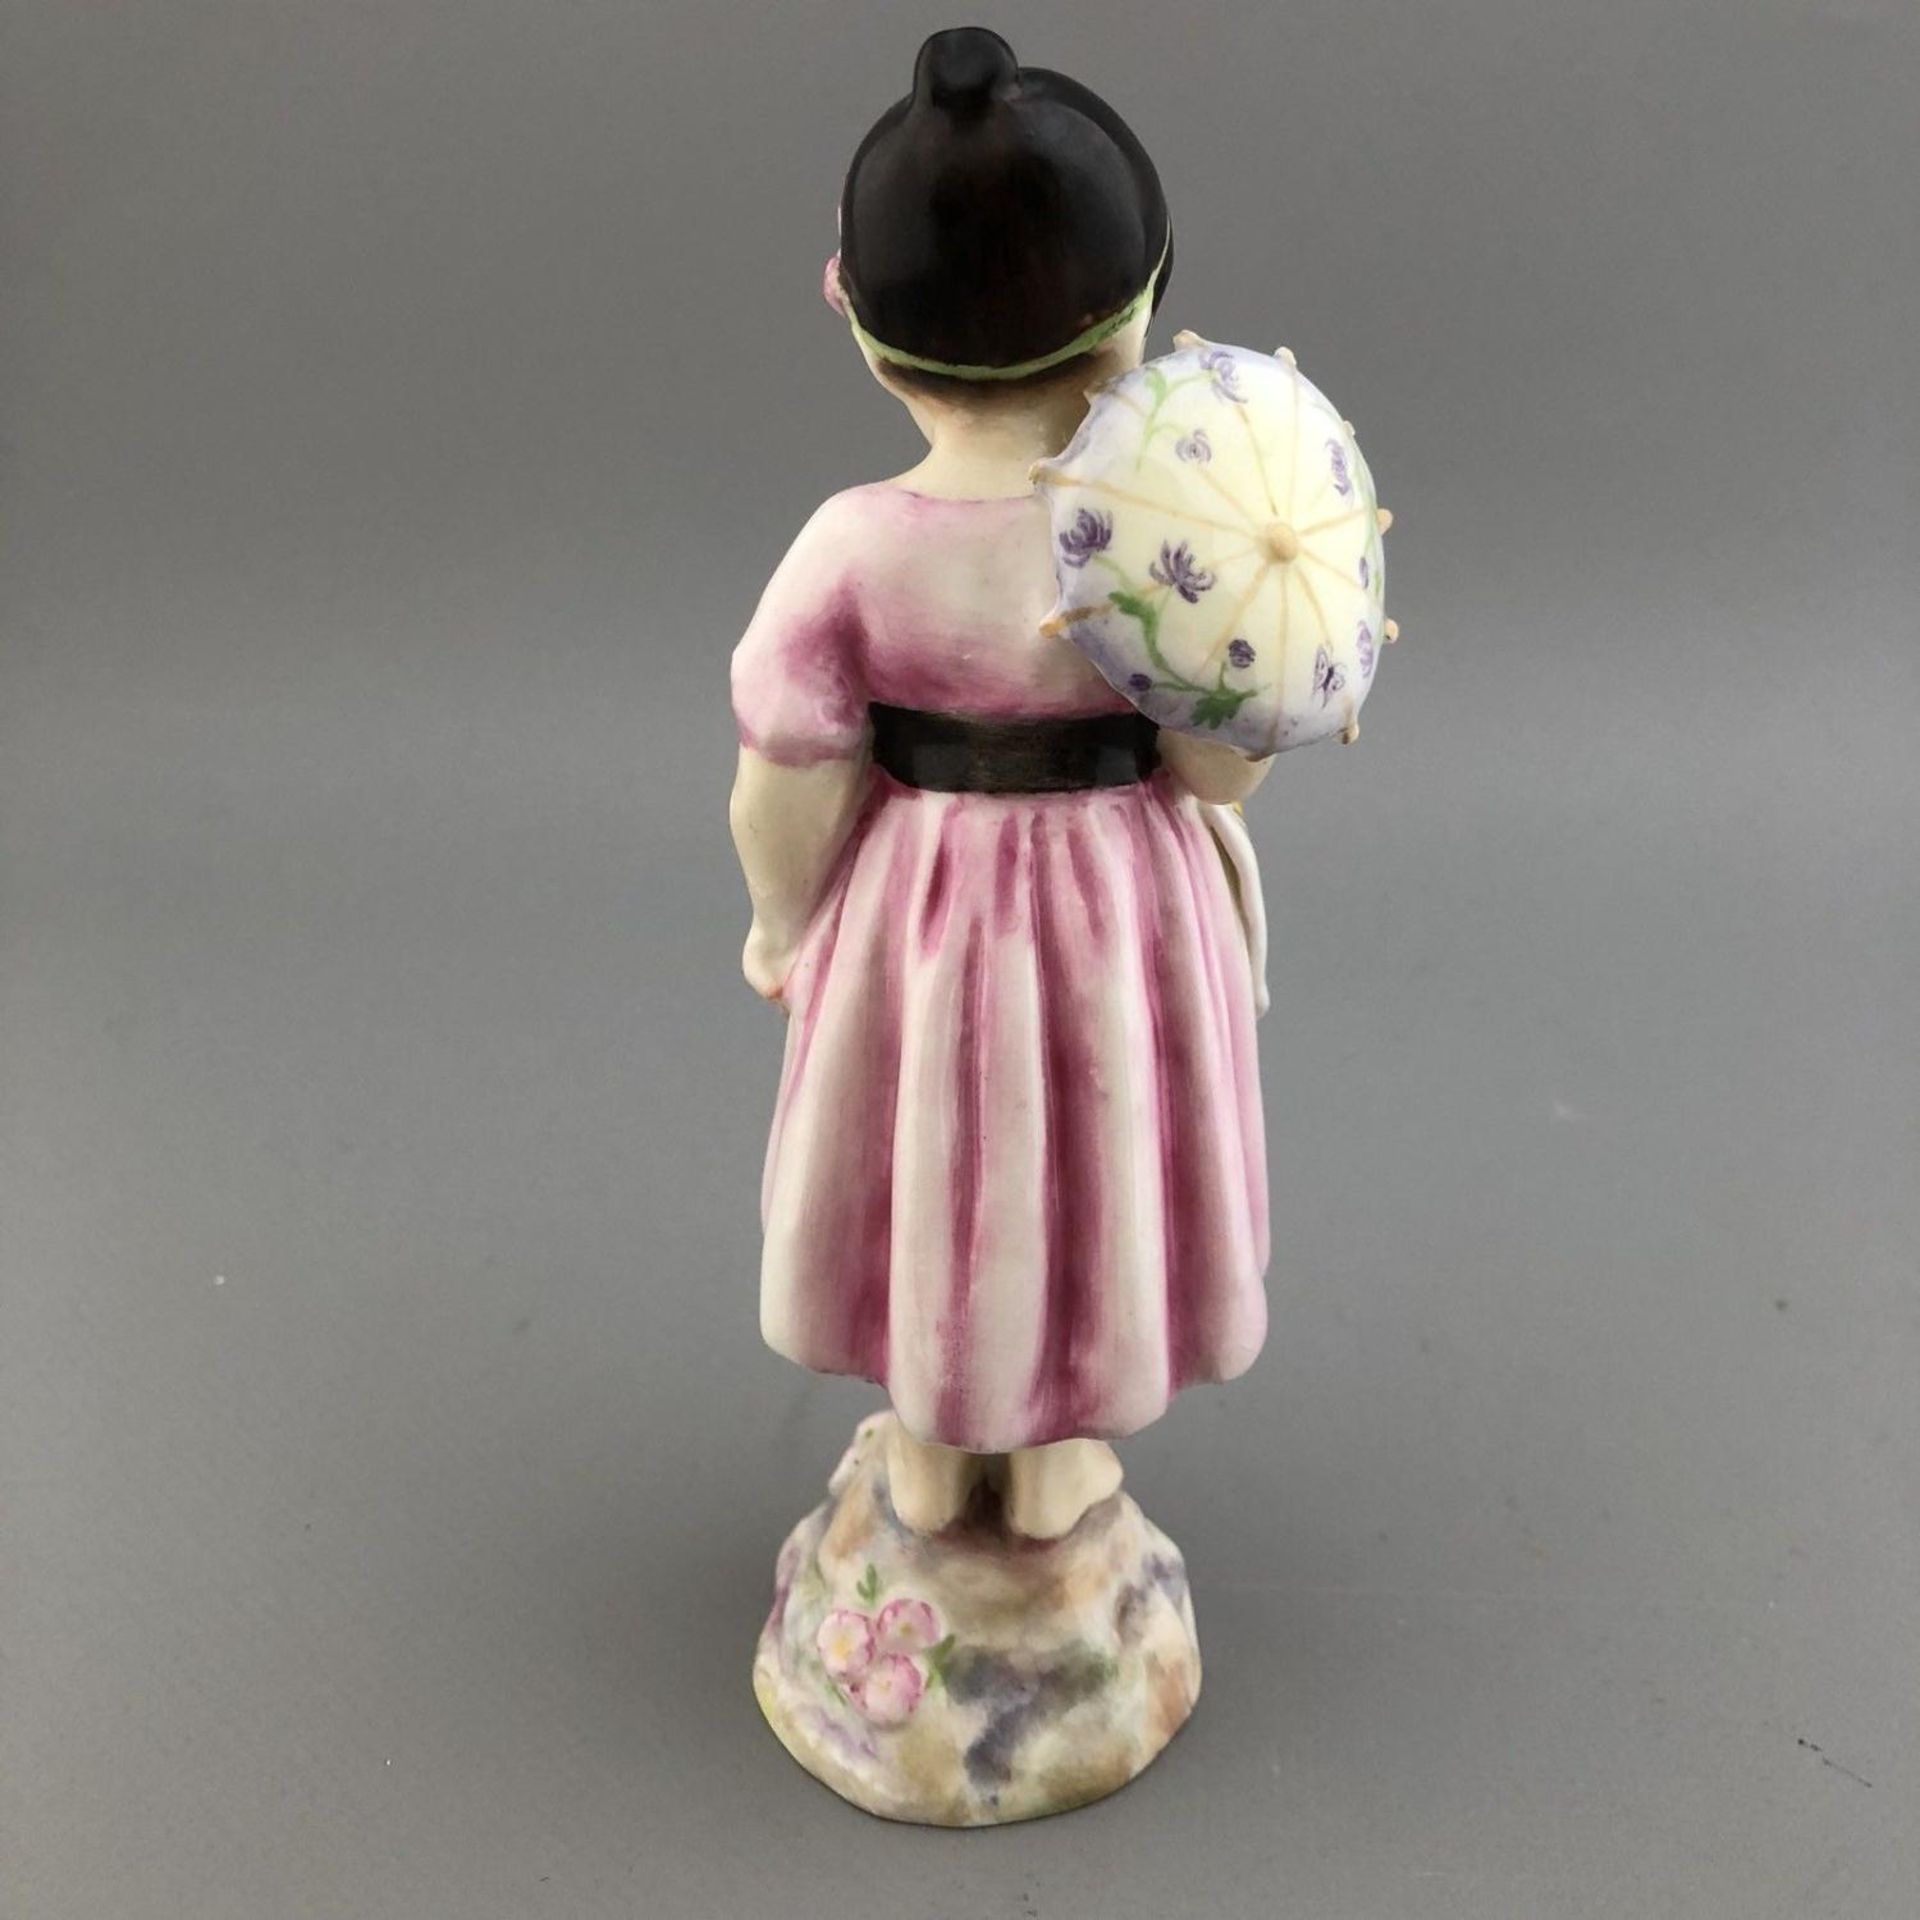 Royal Worcester Porcelain Children of the Nations Figurine SPAIN 3070 1950s - Image 3 of 6